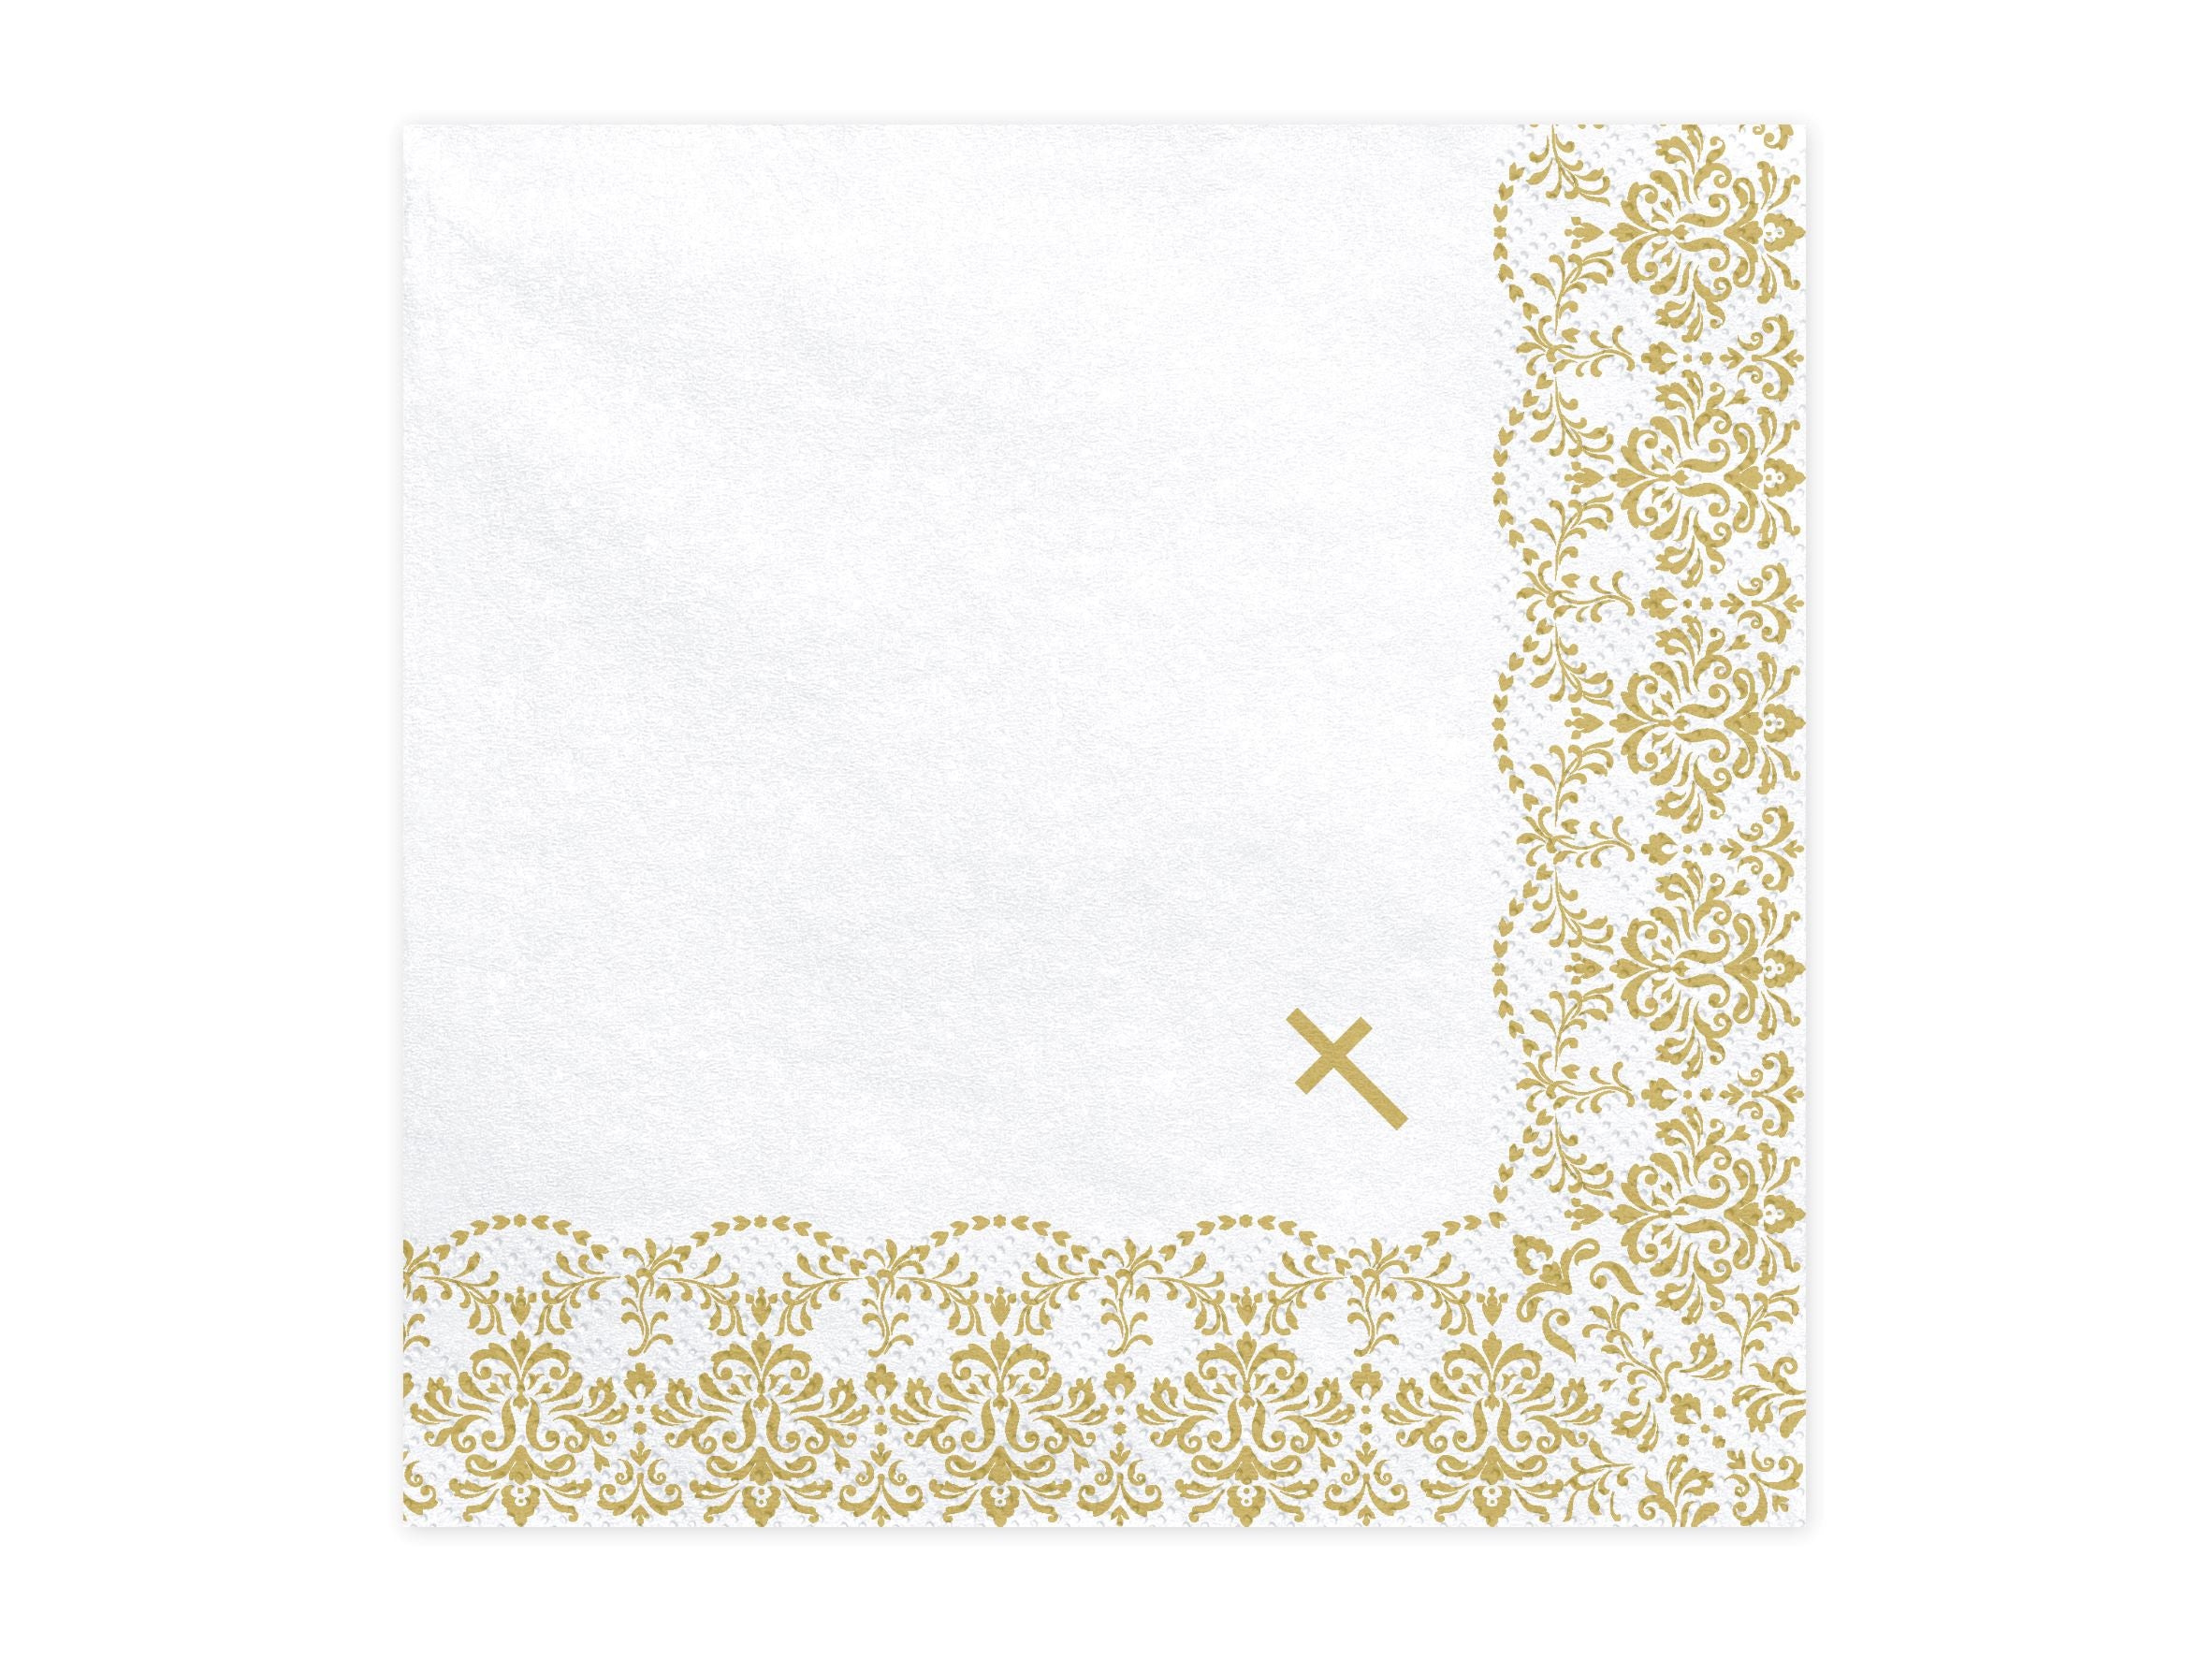 First Communion Ornament Napkins Pack of 20